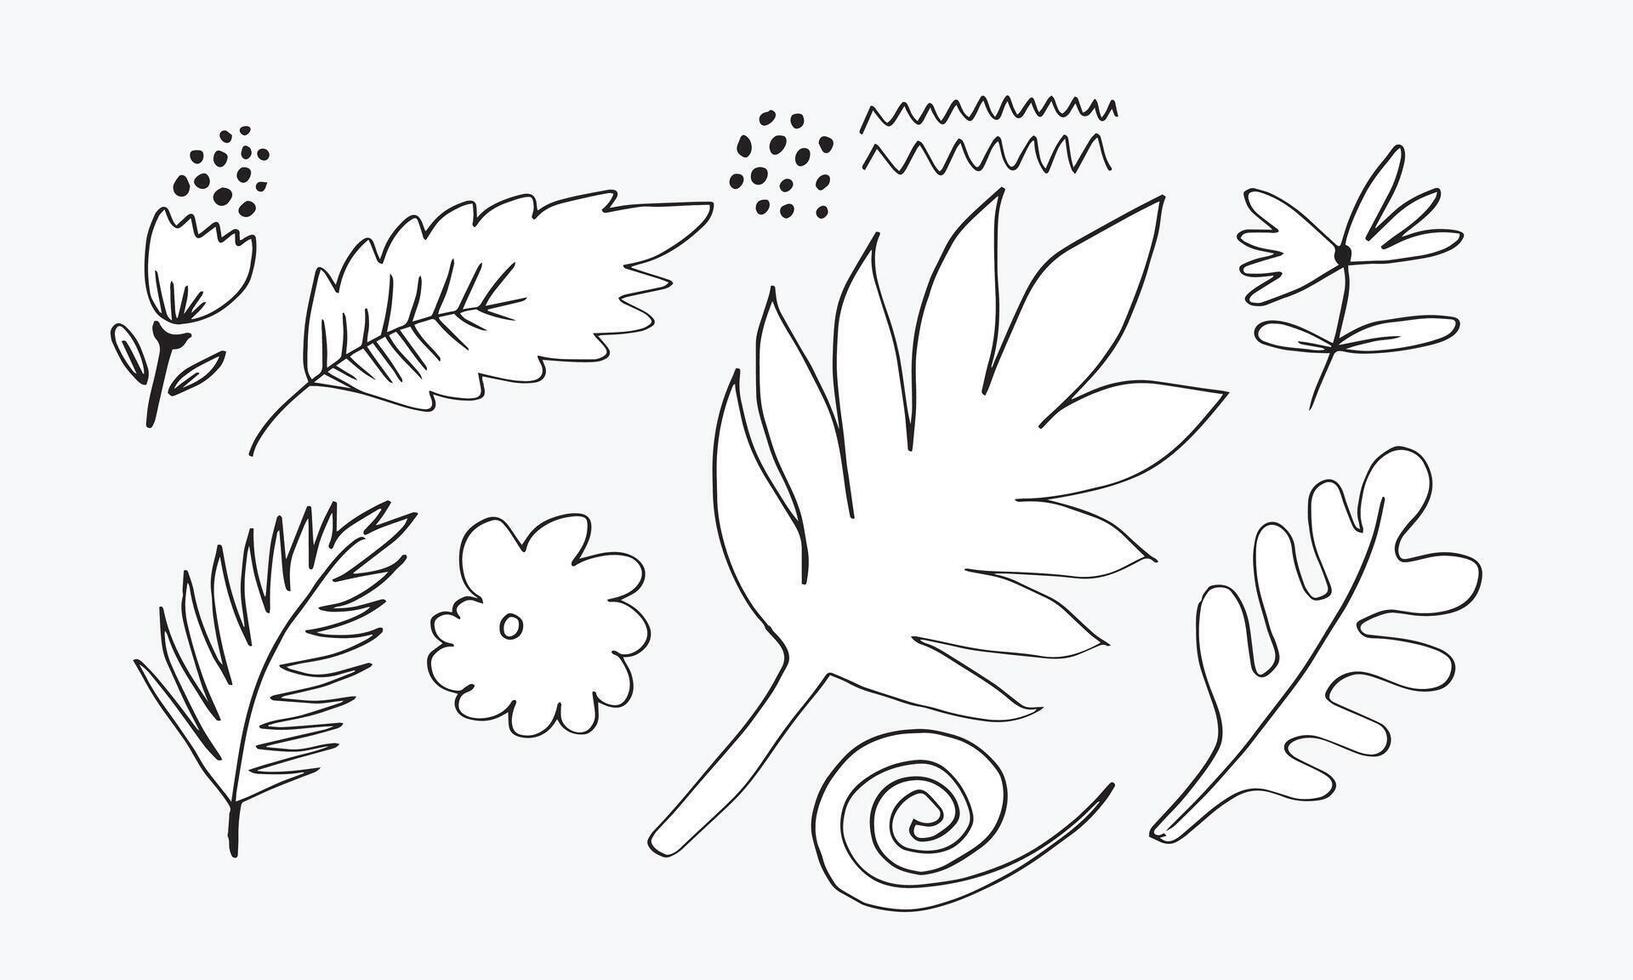 a collection of hand-drawn flower images such as bellflower, chrysanthemums, sunflowers, cotton flowers, and tropical leaves vector